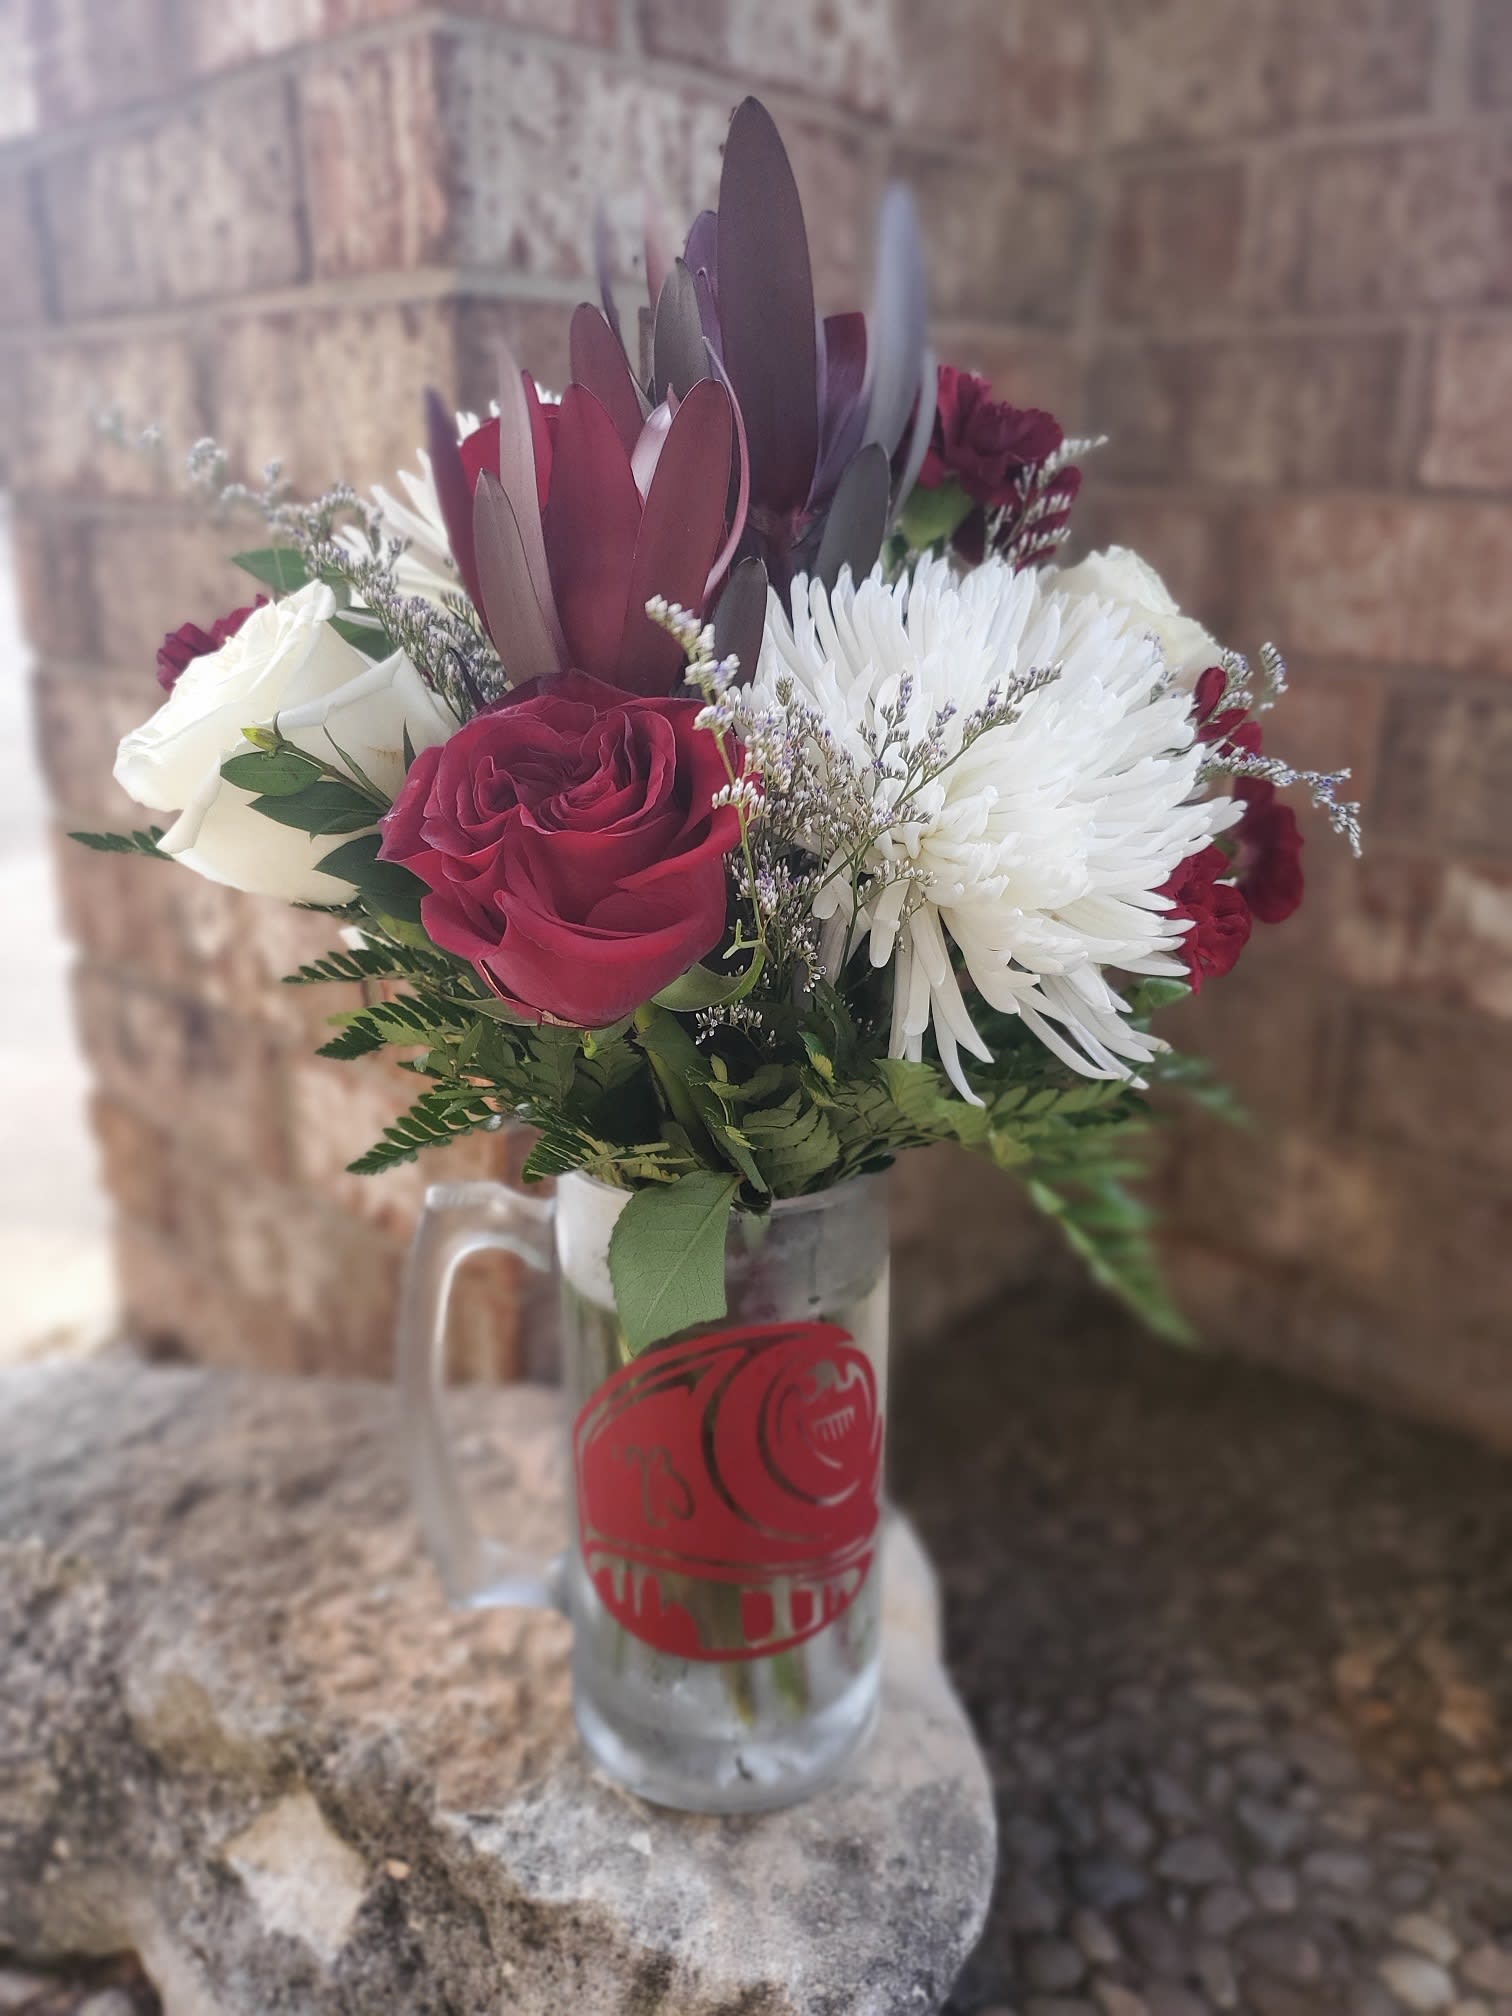 Put a Ring On It - Celebrate any aggie's accomplishments with a gift that lasts. This arrangement includes marron and white flowers in a mug custom printed with a class ring &amp; graduation year. Perfect for graduating, future, or former students!